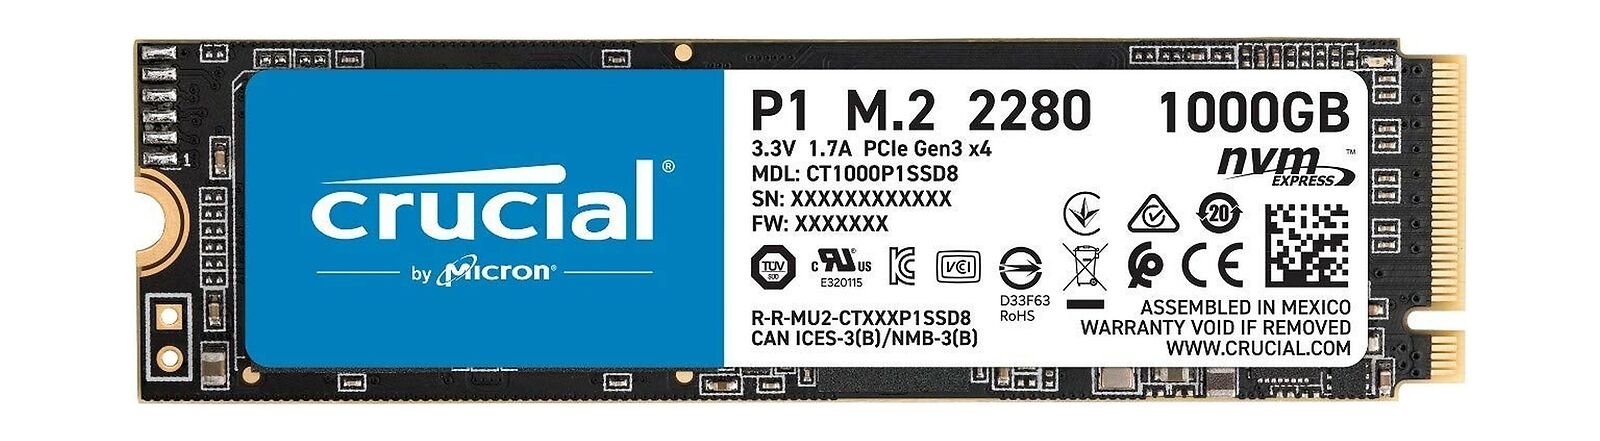 Crucial P1 1TB 3D NAND NVMe PCIe Internal SSD, up to 2000MB/s - CT1000P1SSD8 - image 1 of 2